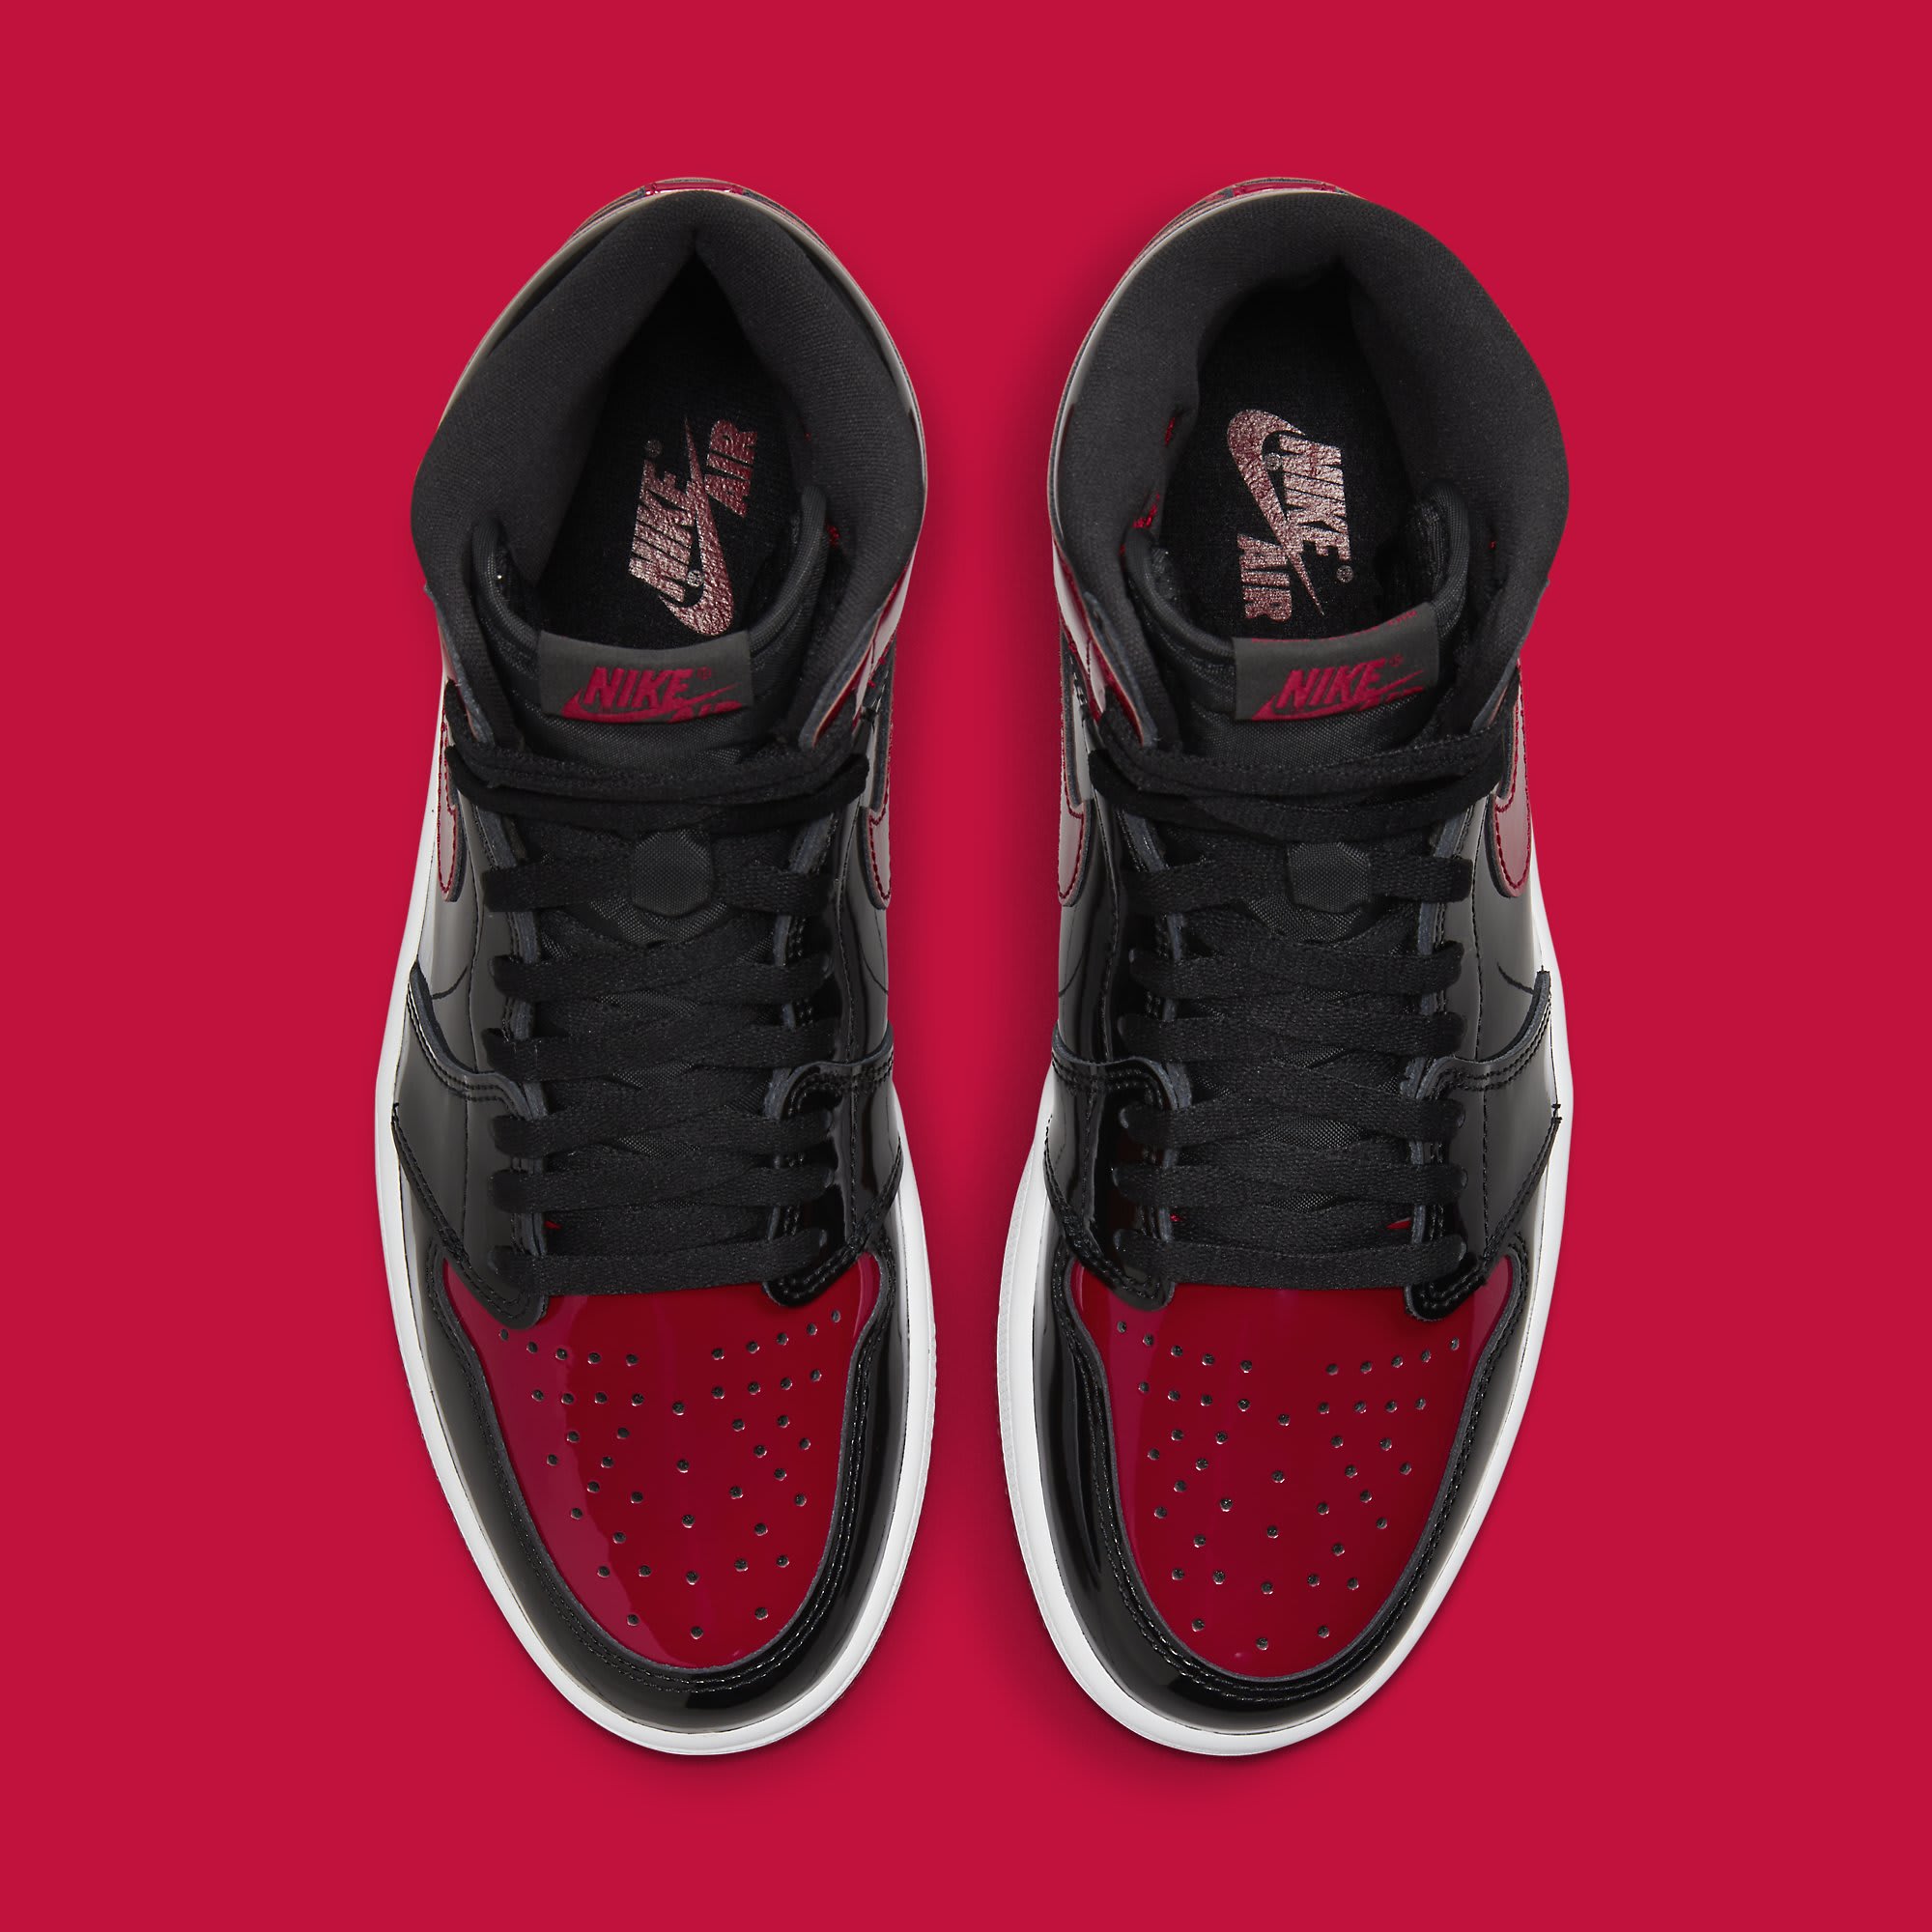 Air Jordan 1 I Bred Patent Leather Release Date 555088-063 Top